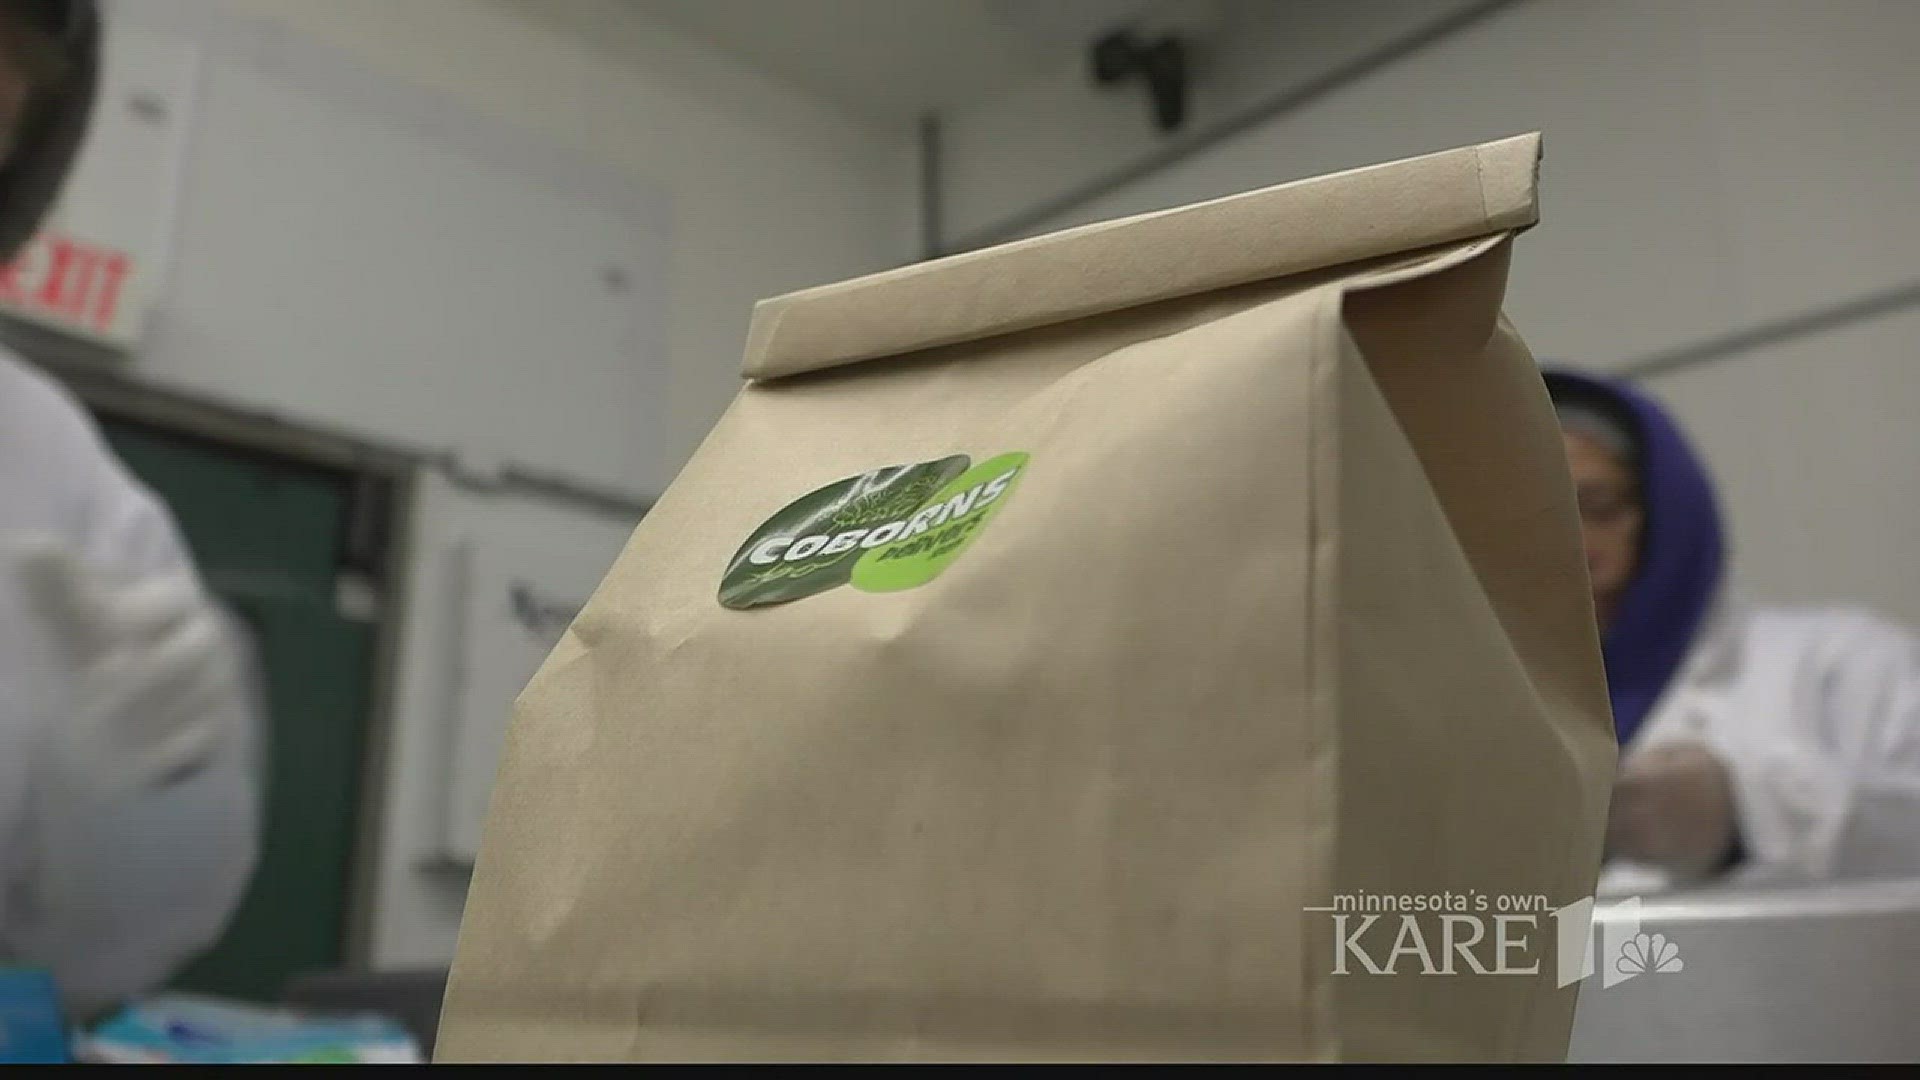 Meal kits are all the rage, and now employee-owned CobornsDelivers is launching brown bag meal kits for kits.